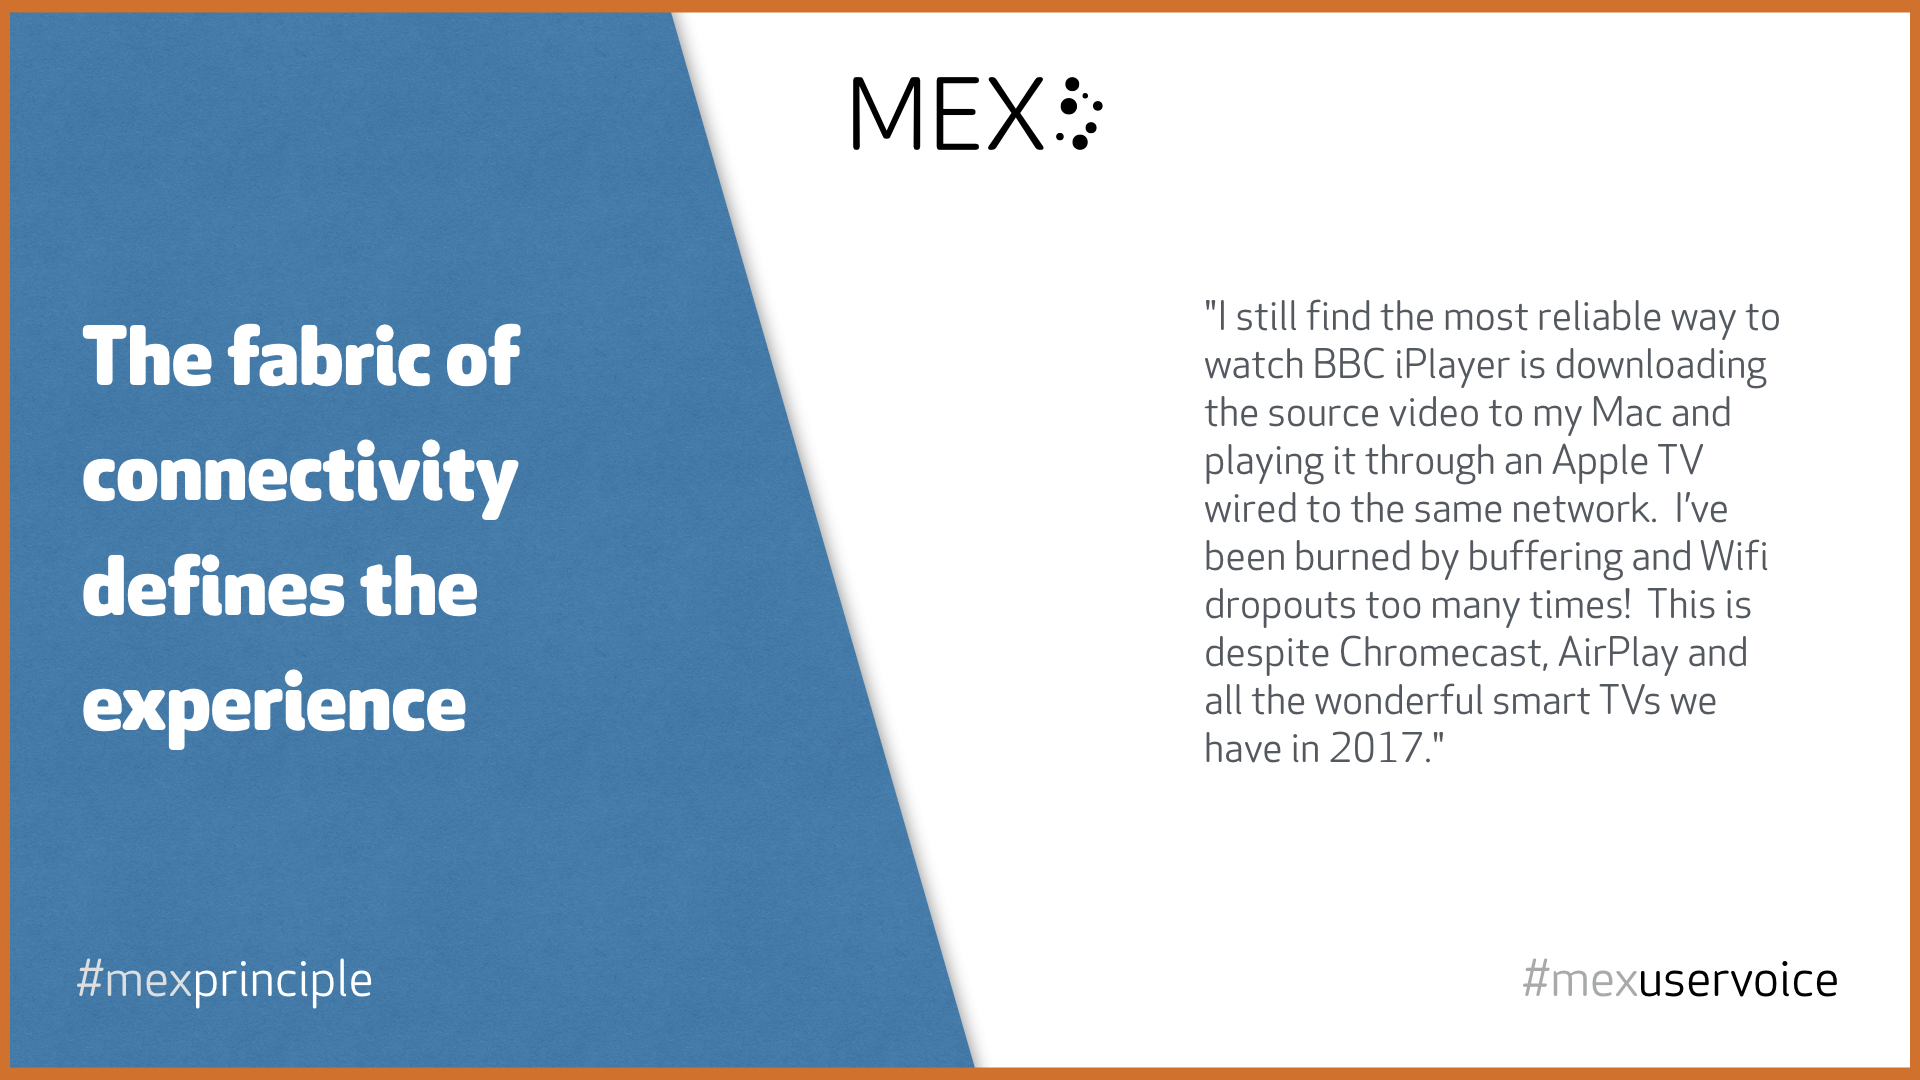 The fabric of connectivity defines the experience #mexprinciple